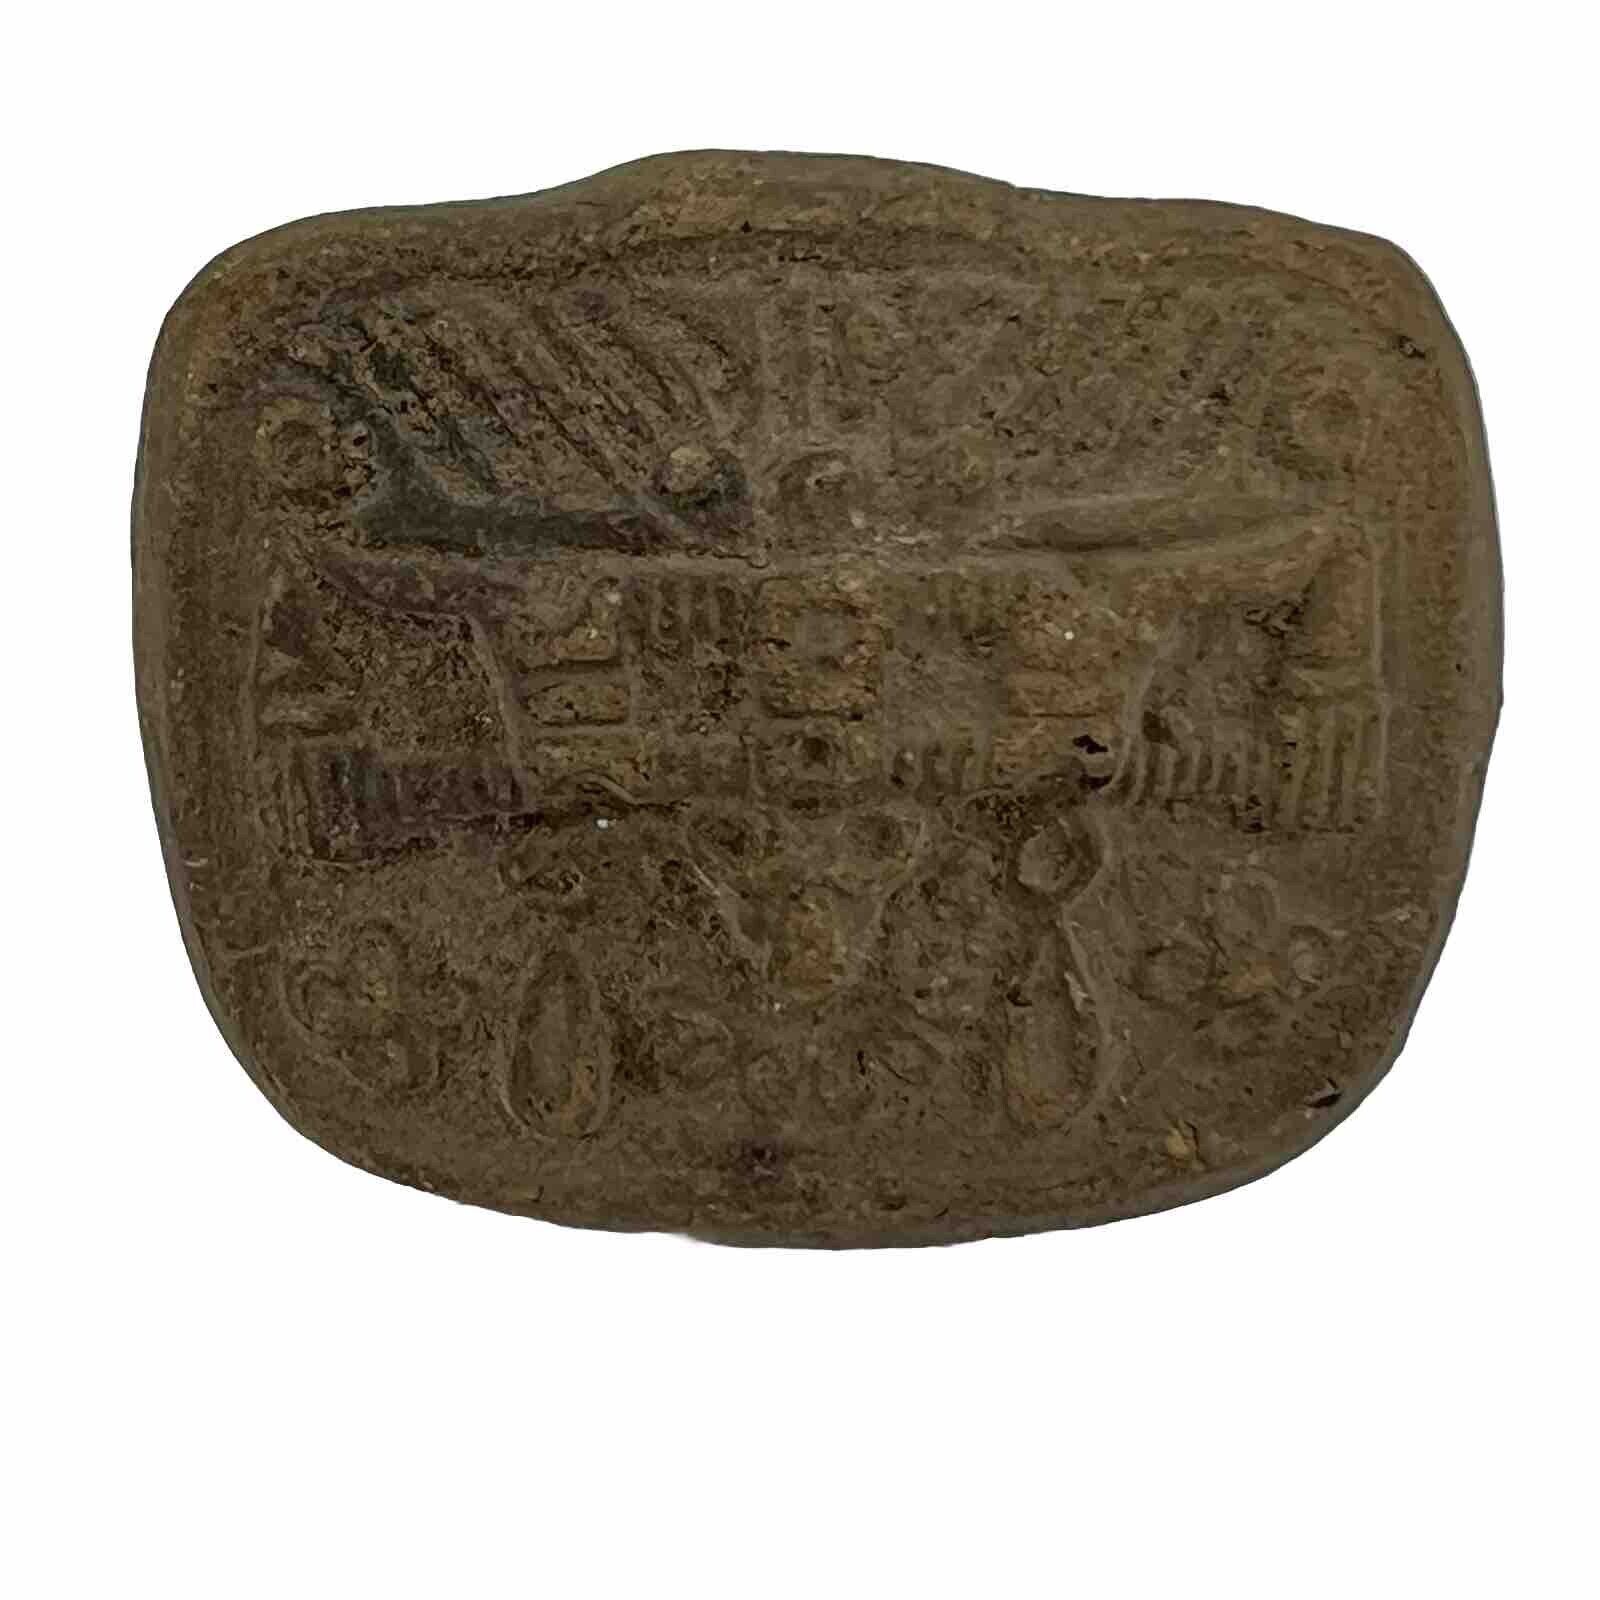 RARE Antique Pre-columbian Teotihuacan Pottery Stamp 450-650 A.D